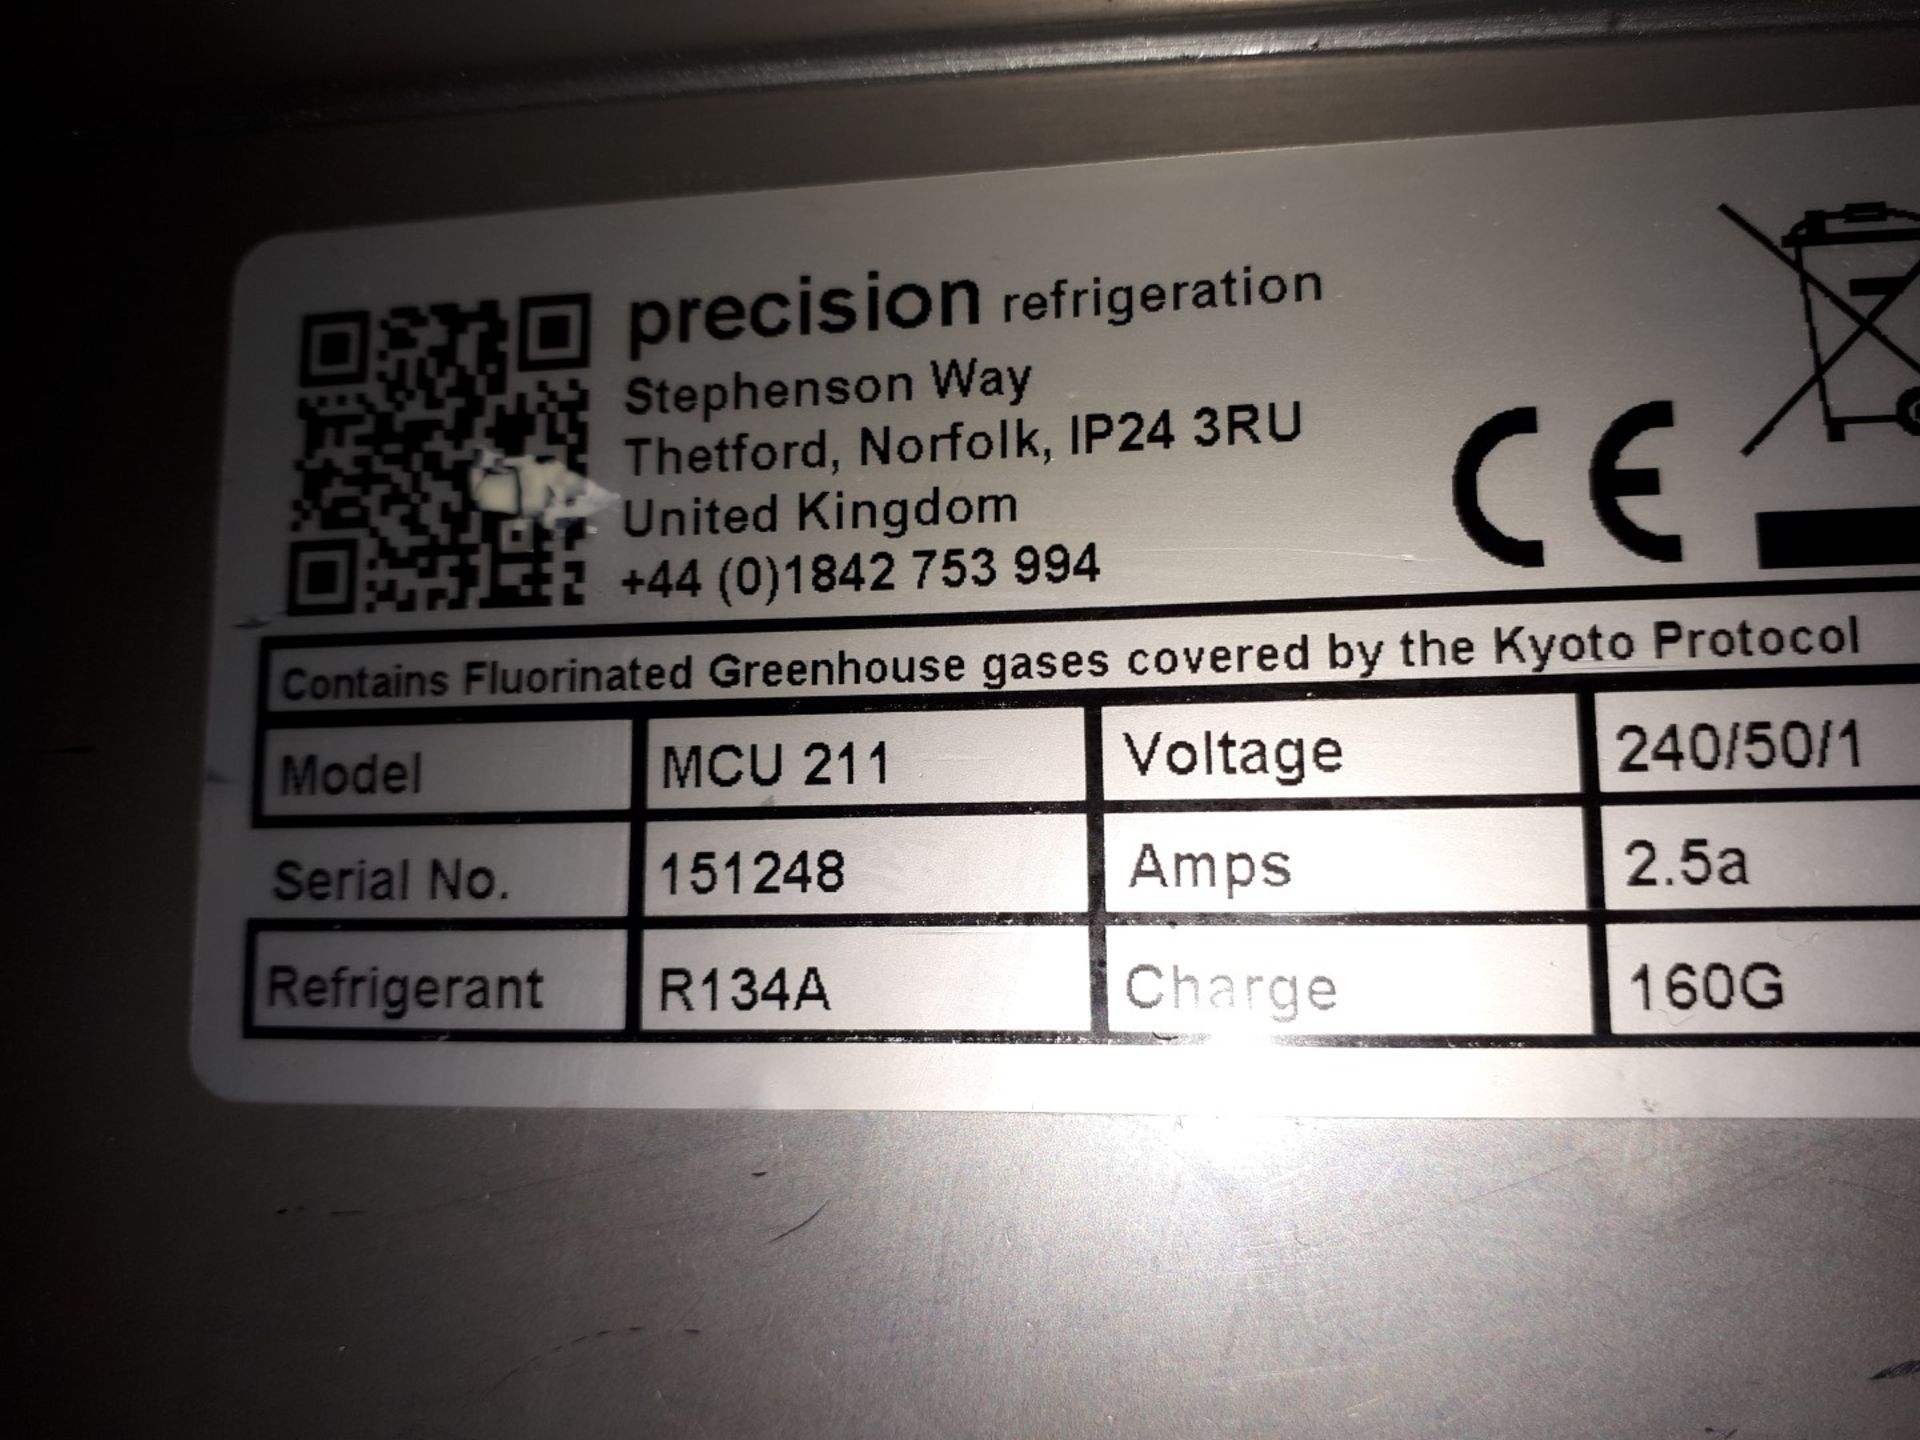 Precision MCU 211 Stainless Steel Two Door Counter Fridge - Image 4 of 4